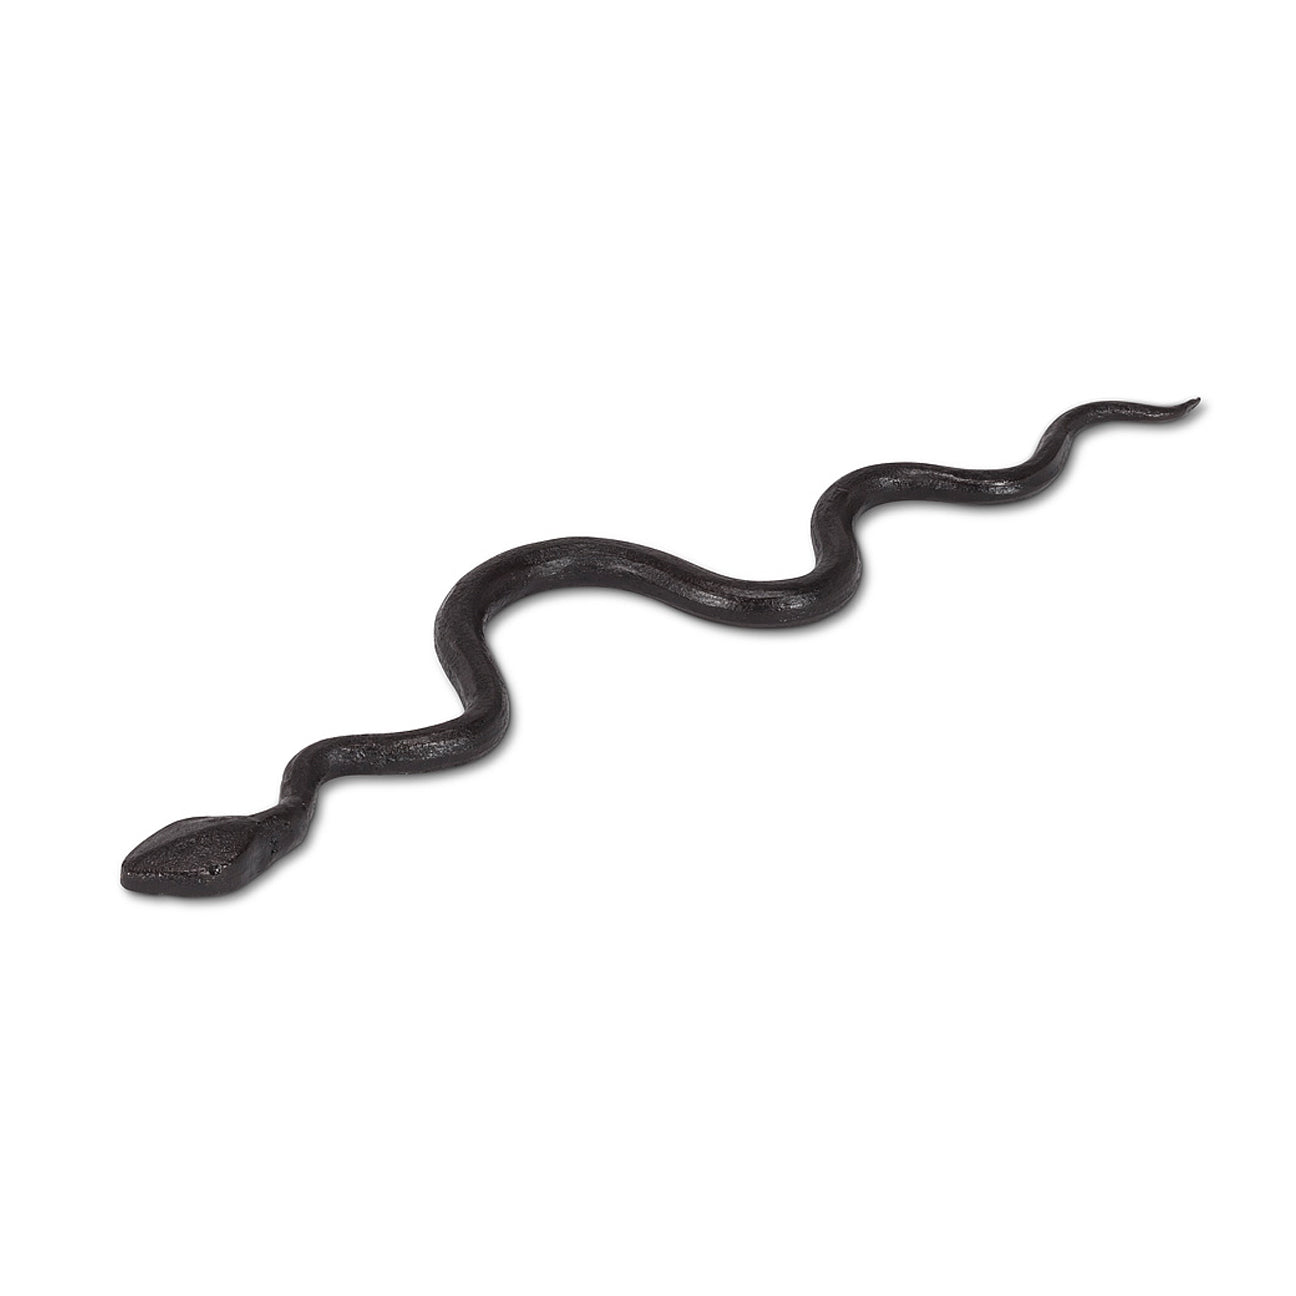 Cast Iron Squirming Snake